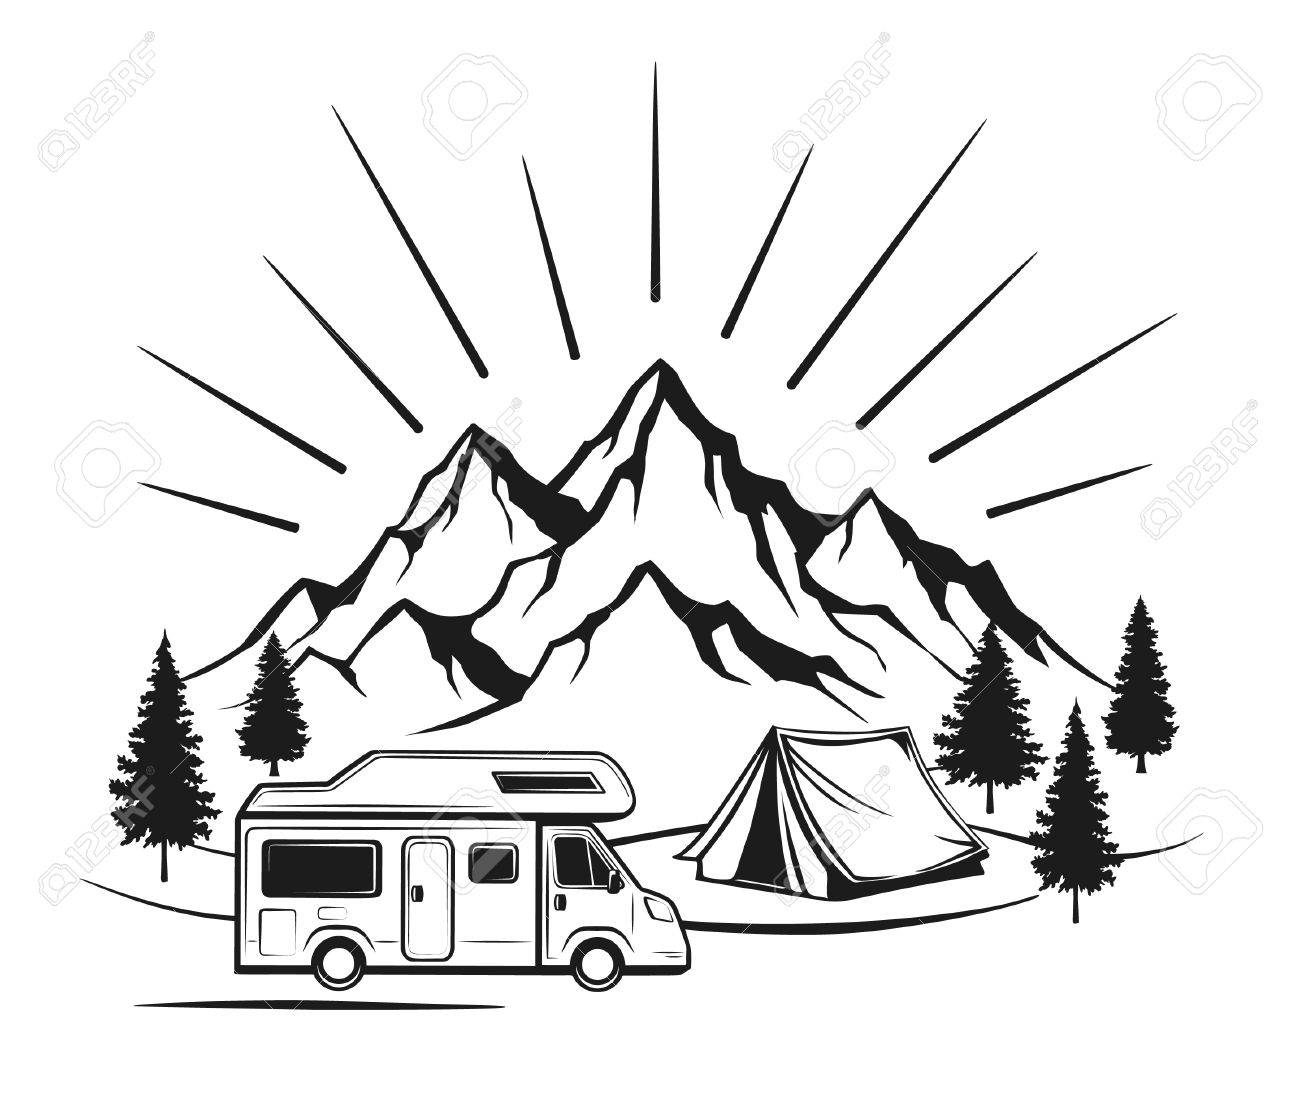 1391 Tent free clipart.